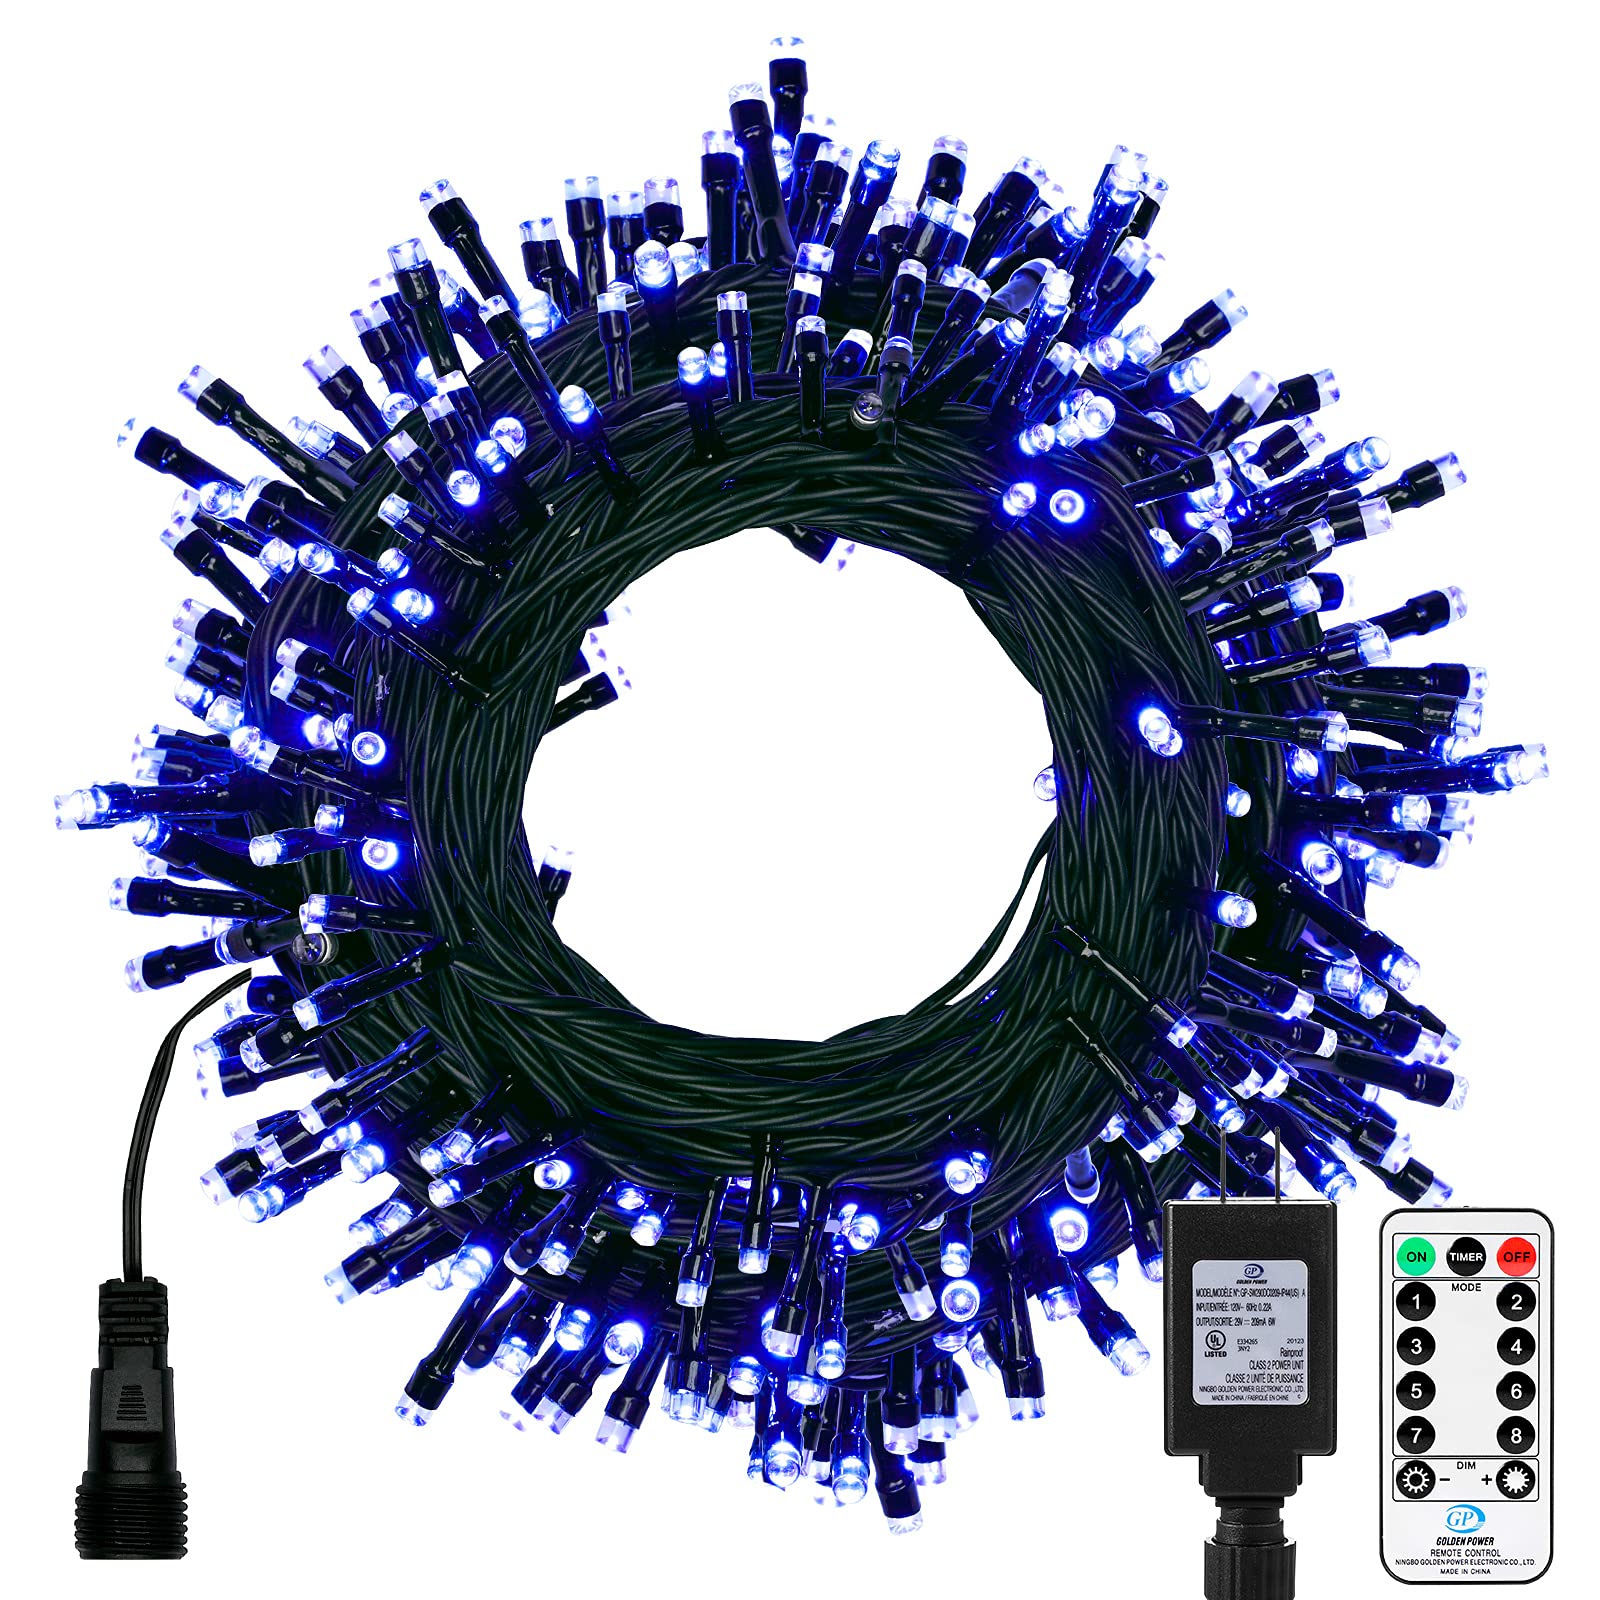 98 Feet / 300 LED / Blue / Green Wire